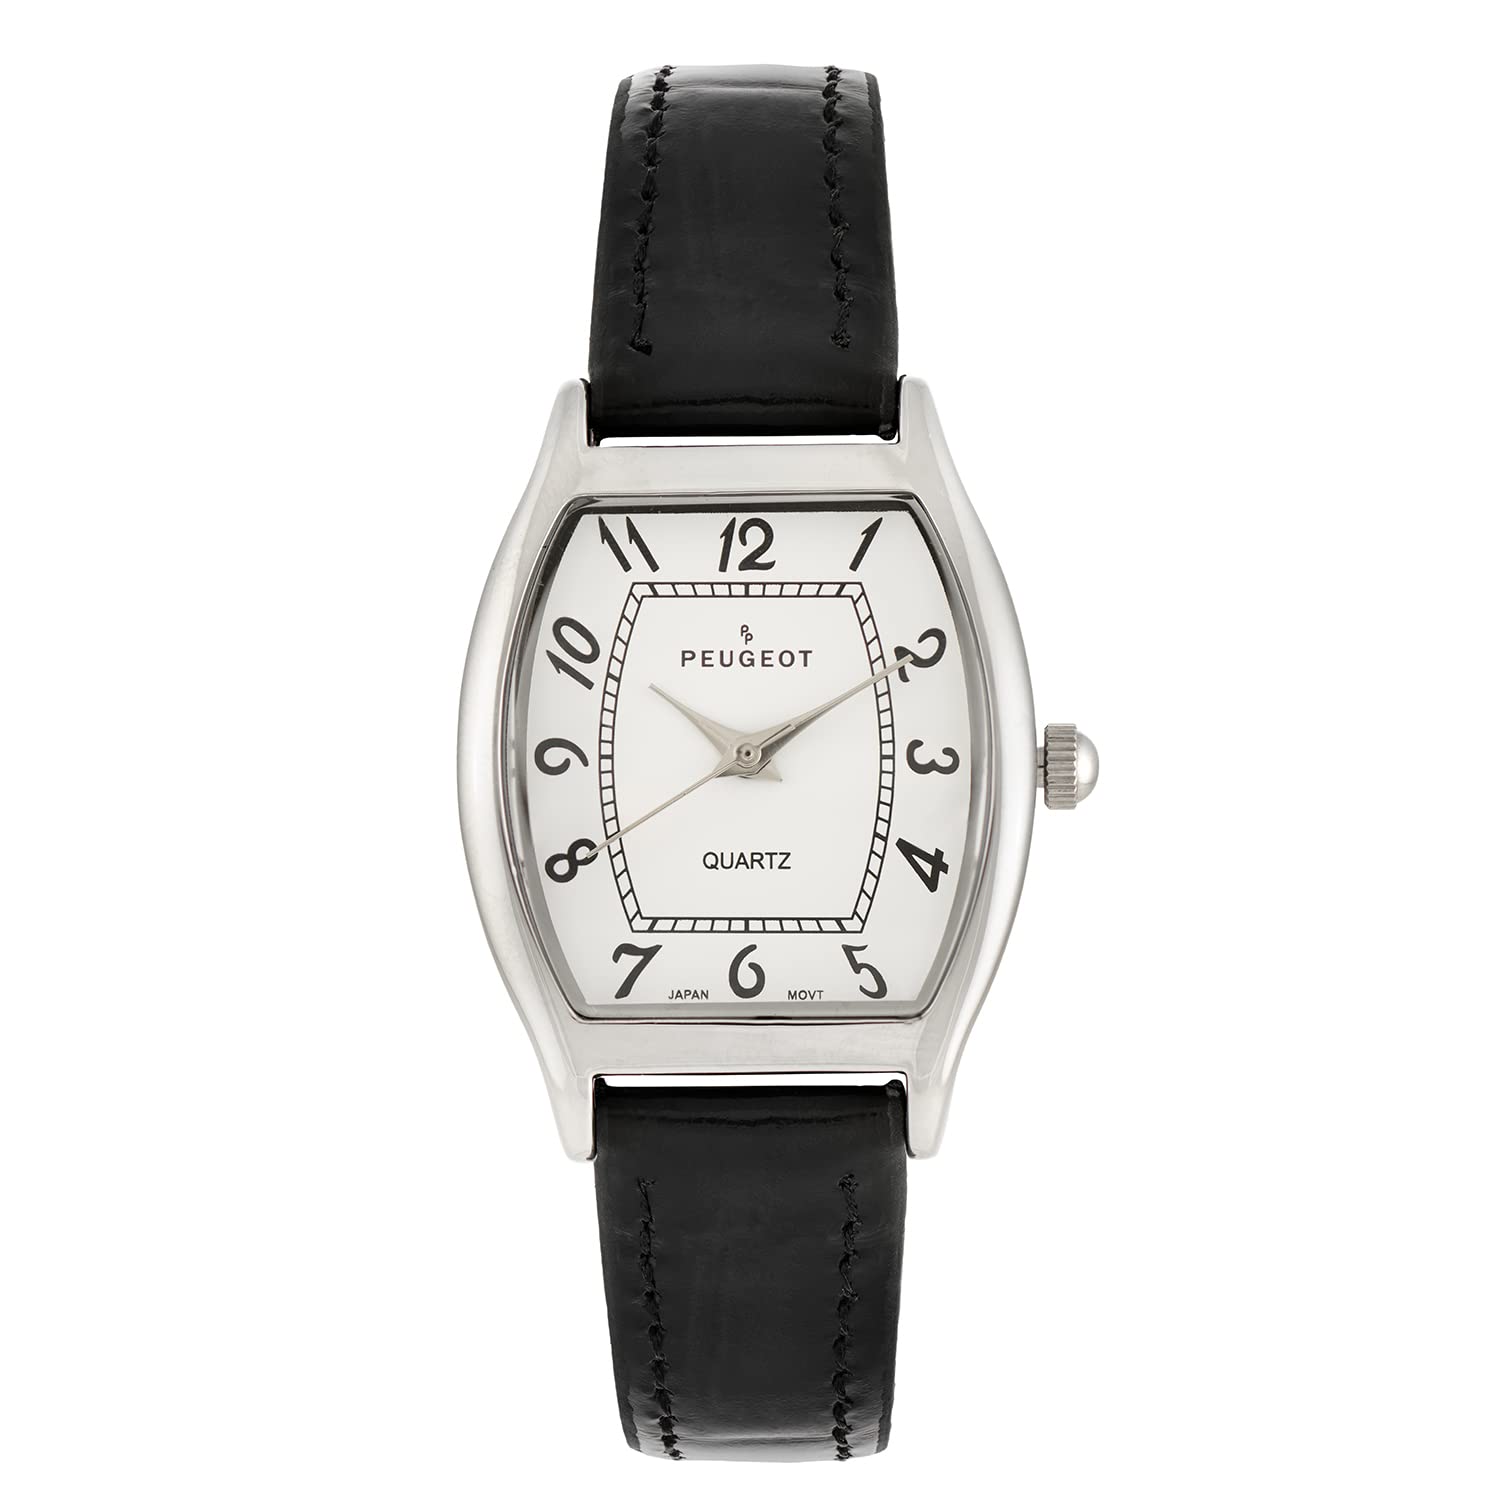 PEUGEOT Women Fashion Silver Cushion Shape Watch with Arabic Numerals and Genuine Leather Strap Black